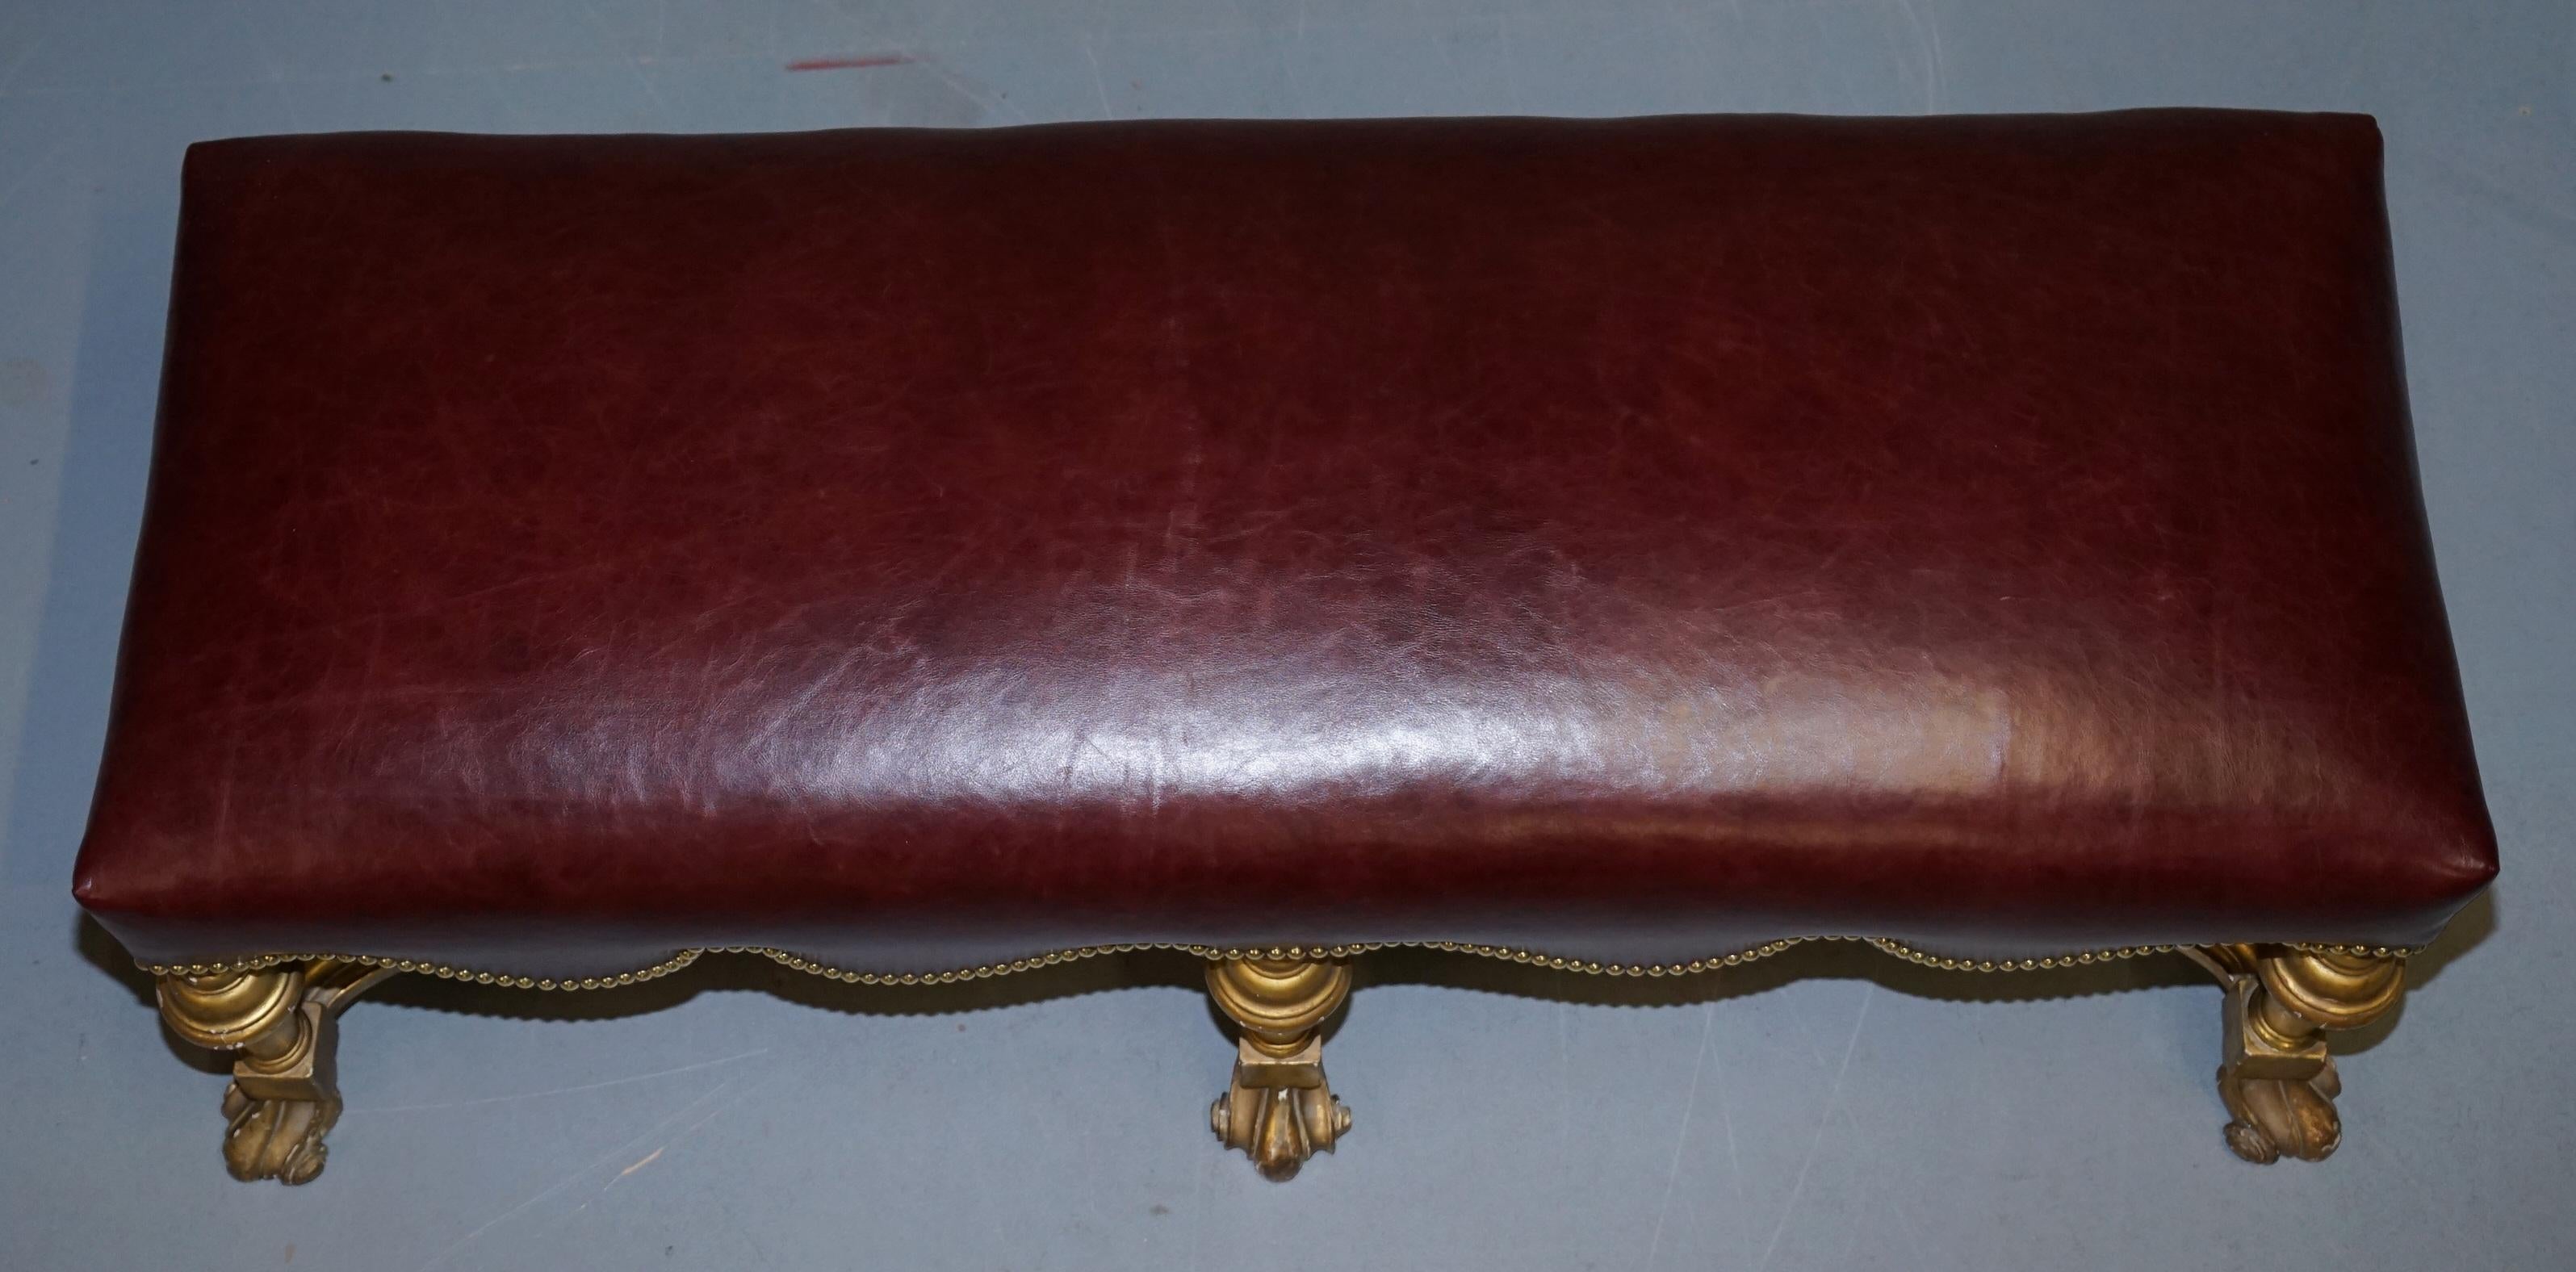 Early 19th Century Italian Baroque Style Gold Giltwood Bench Stool New Oxblood Leather, circa 1800 For Sale